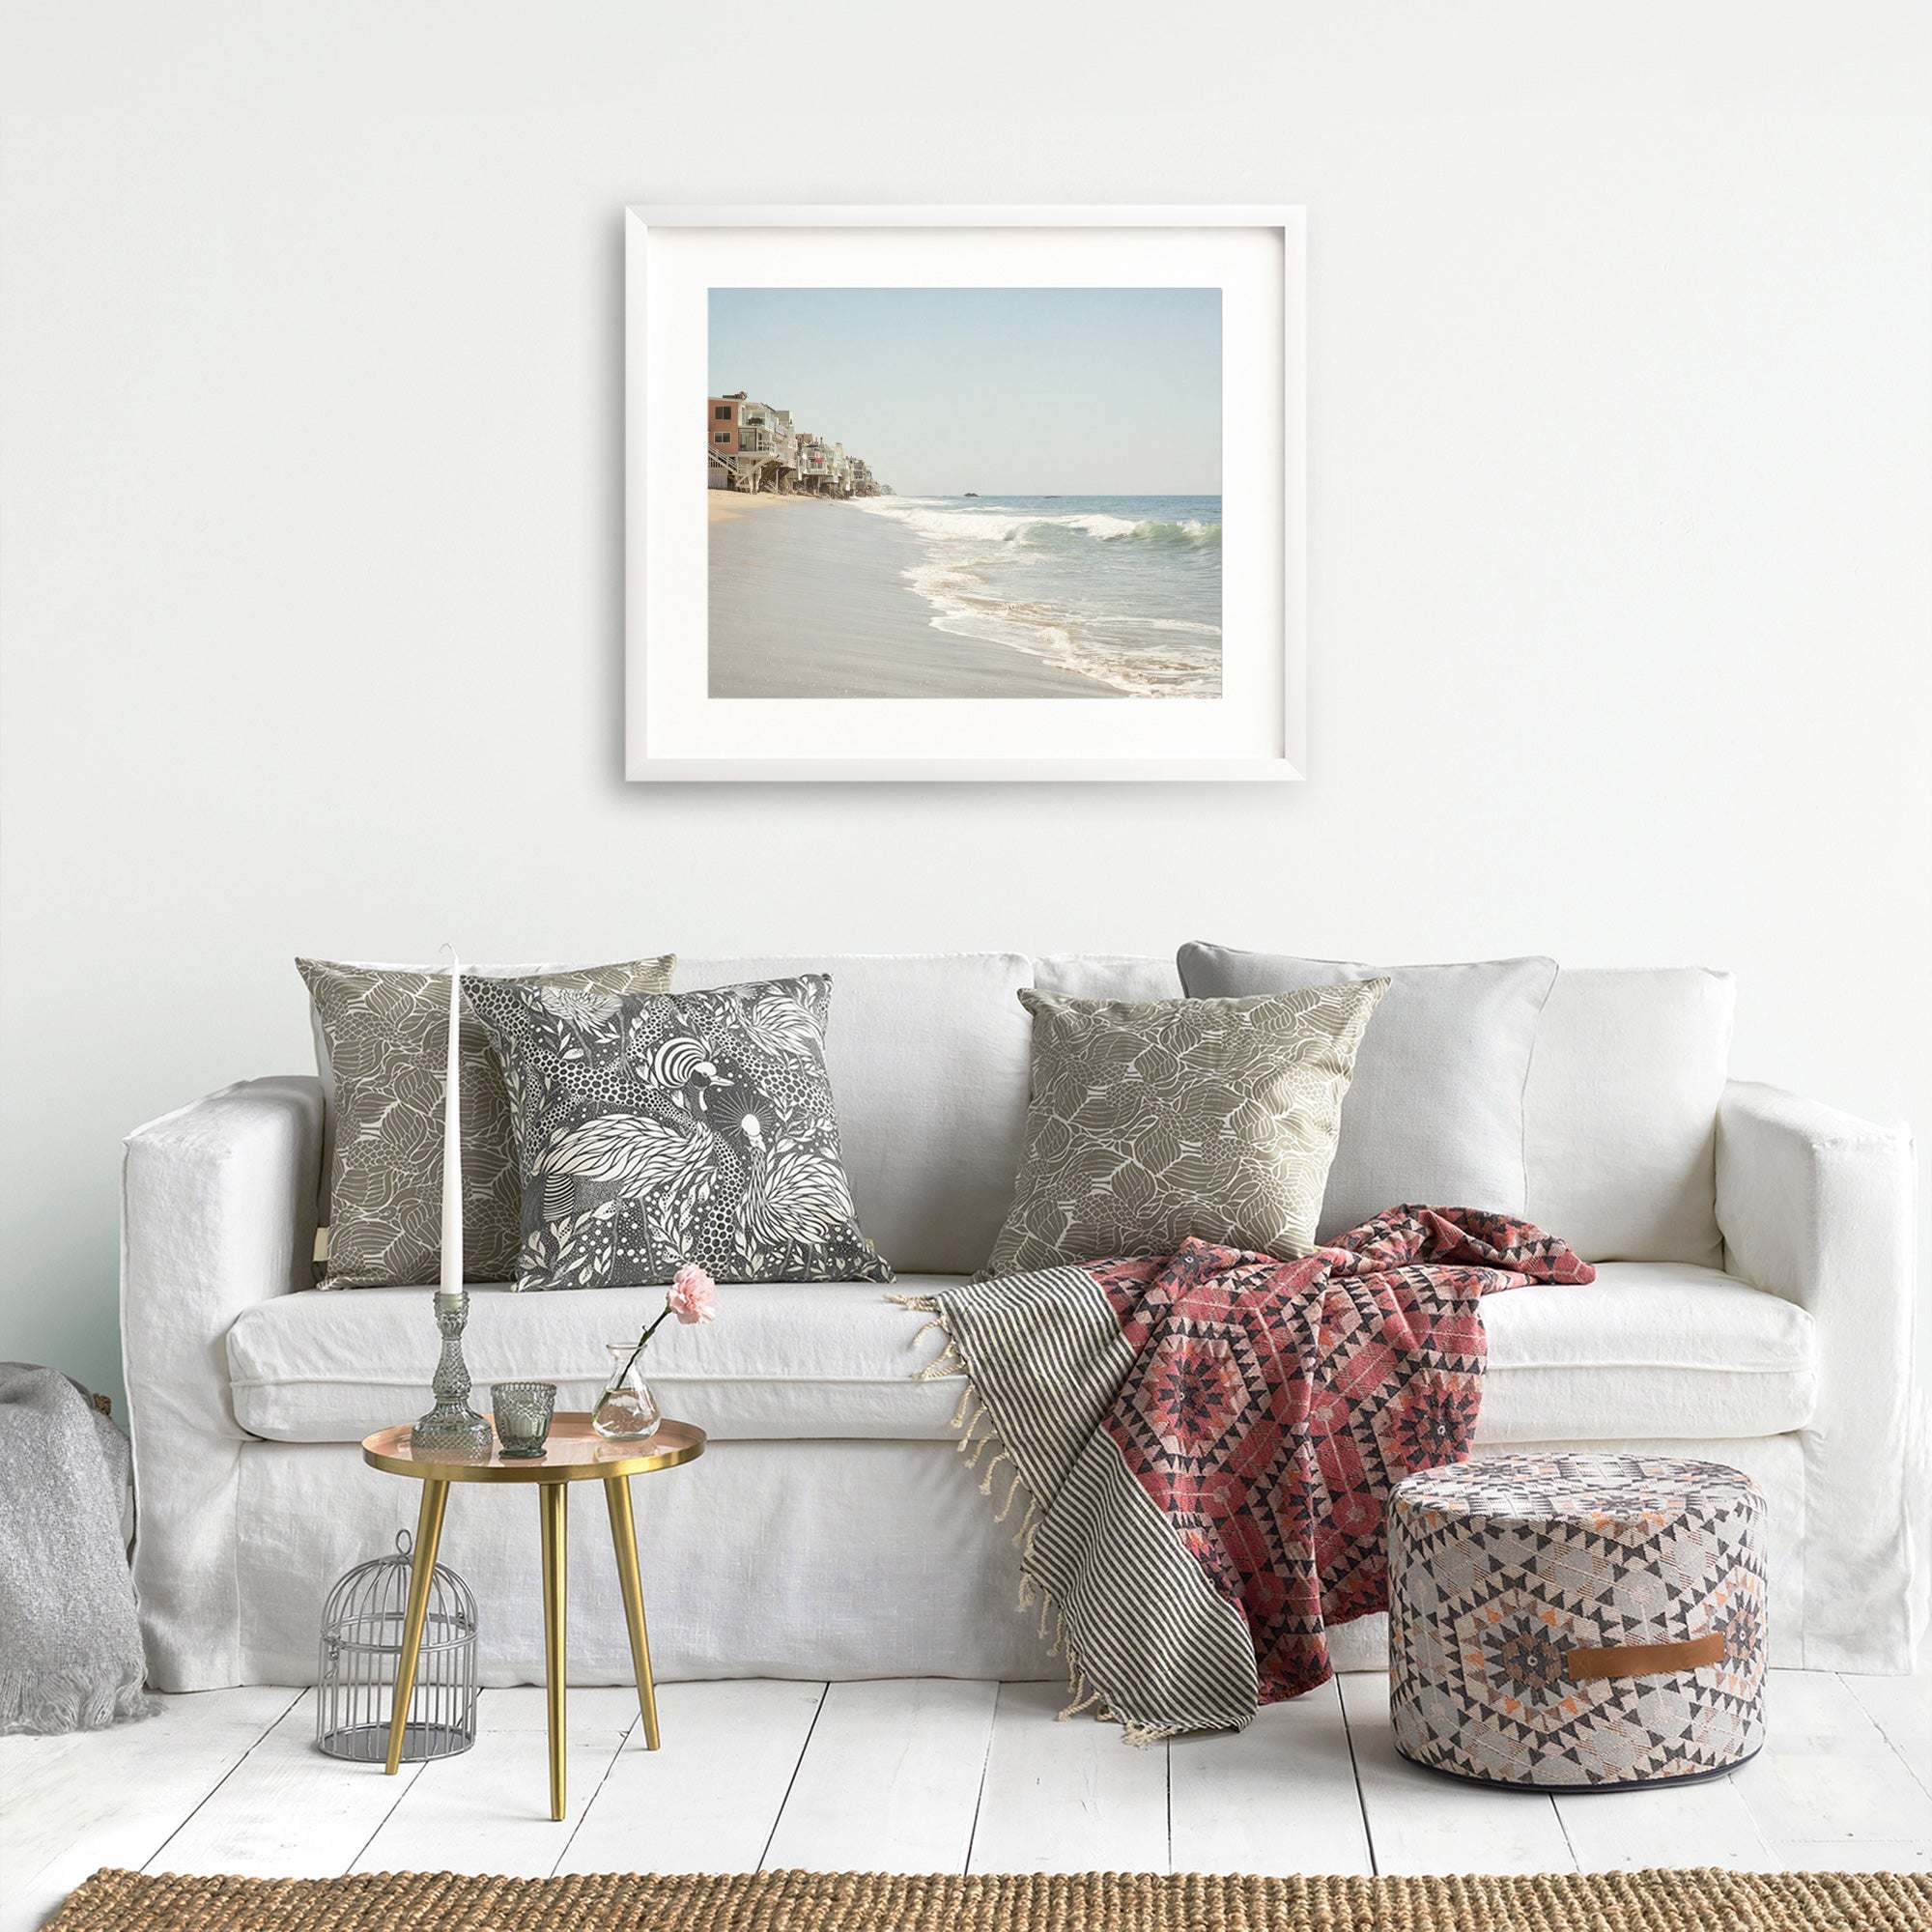 A cozy living room setup with a white sofa adorned with various patterned cushions, a throw blanket, a small round table with flowers, a cage-like decor item, and Offley Green's Malibu Beach House Print, 'Ocean View' wall art.